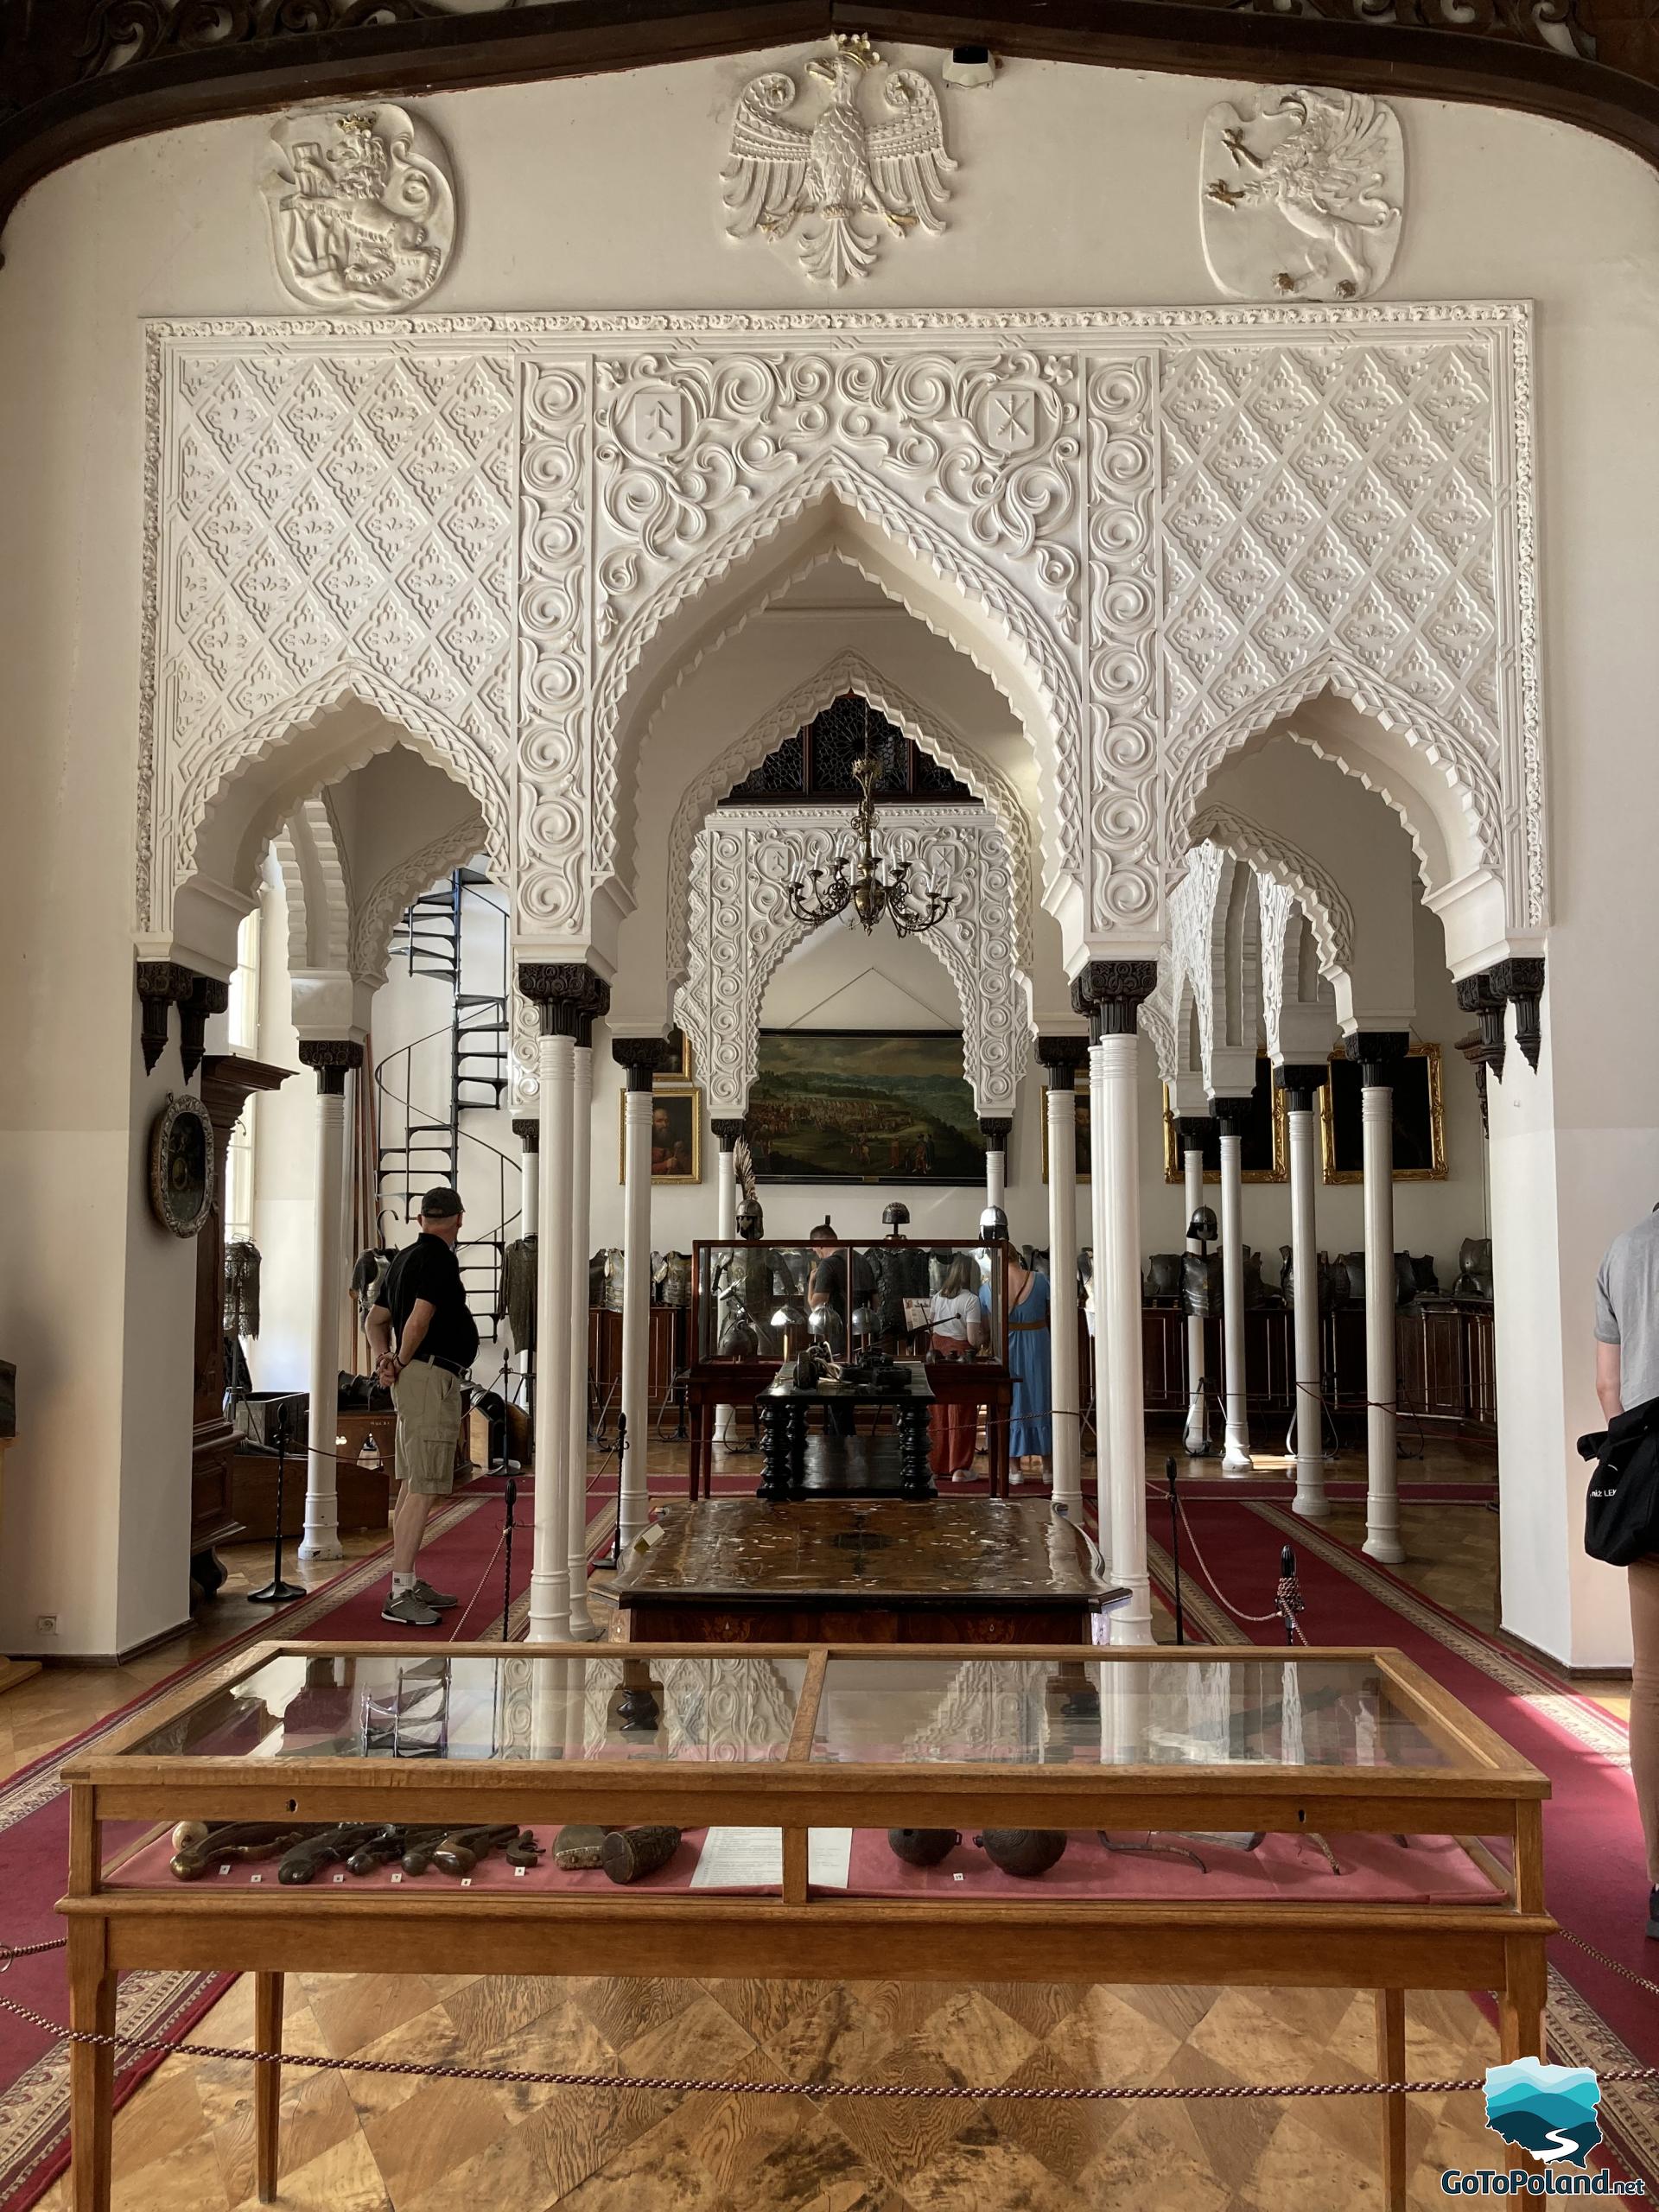 a room in the Moorish style, shelves with porcelain, few tourists viewing the exhibitions